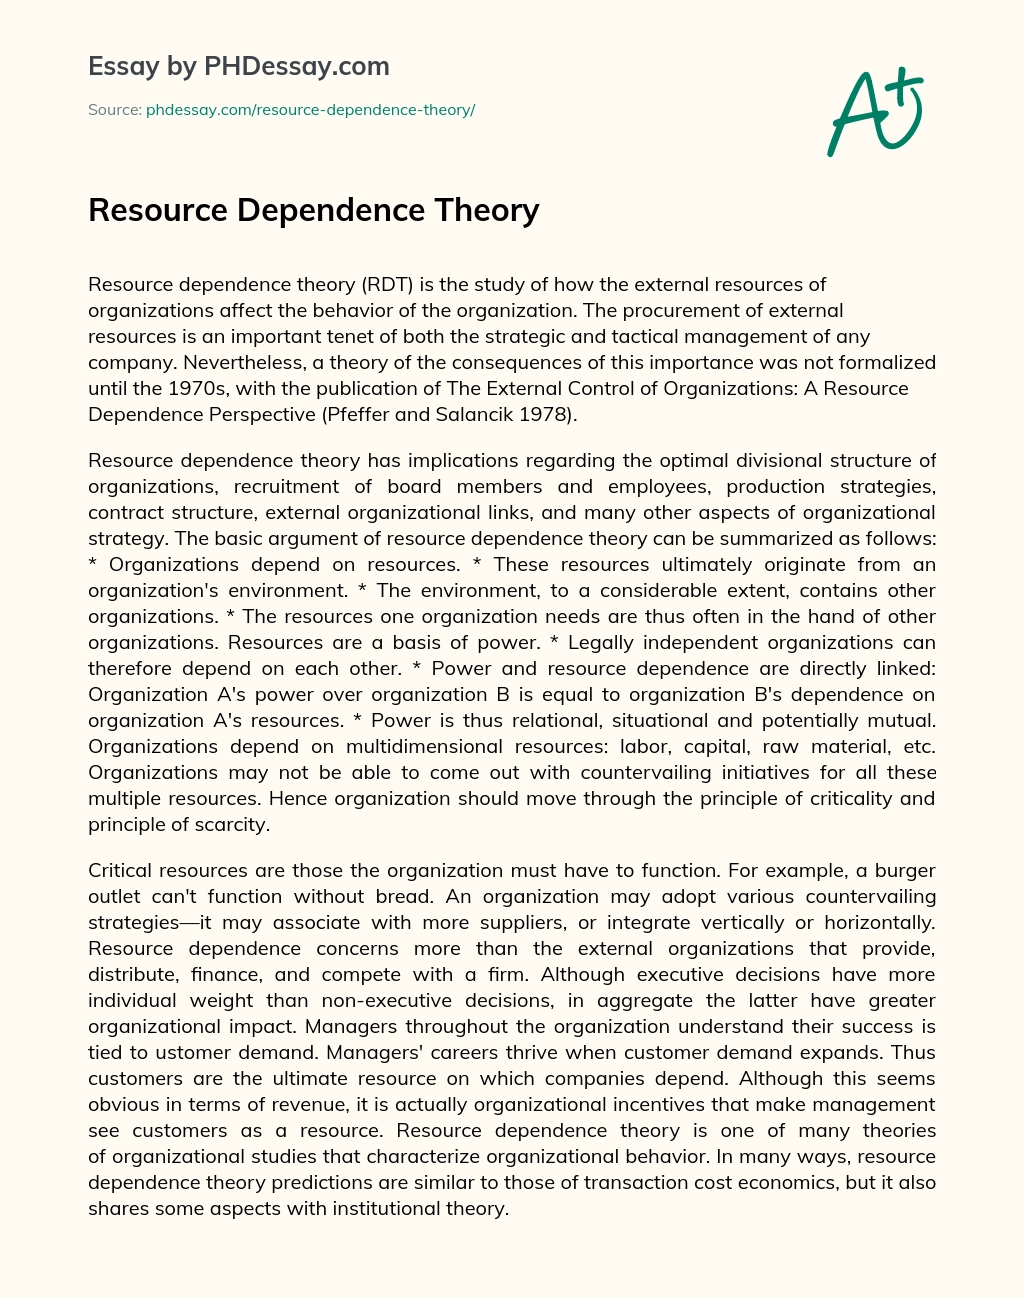 Resource Dependence Theory essay